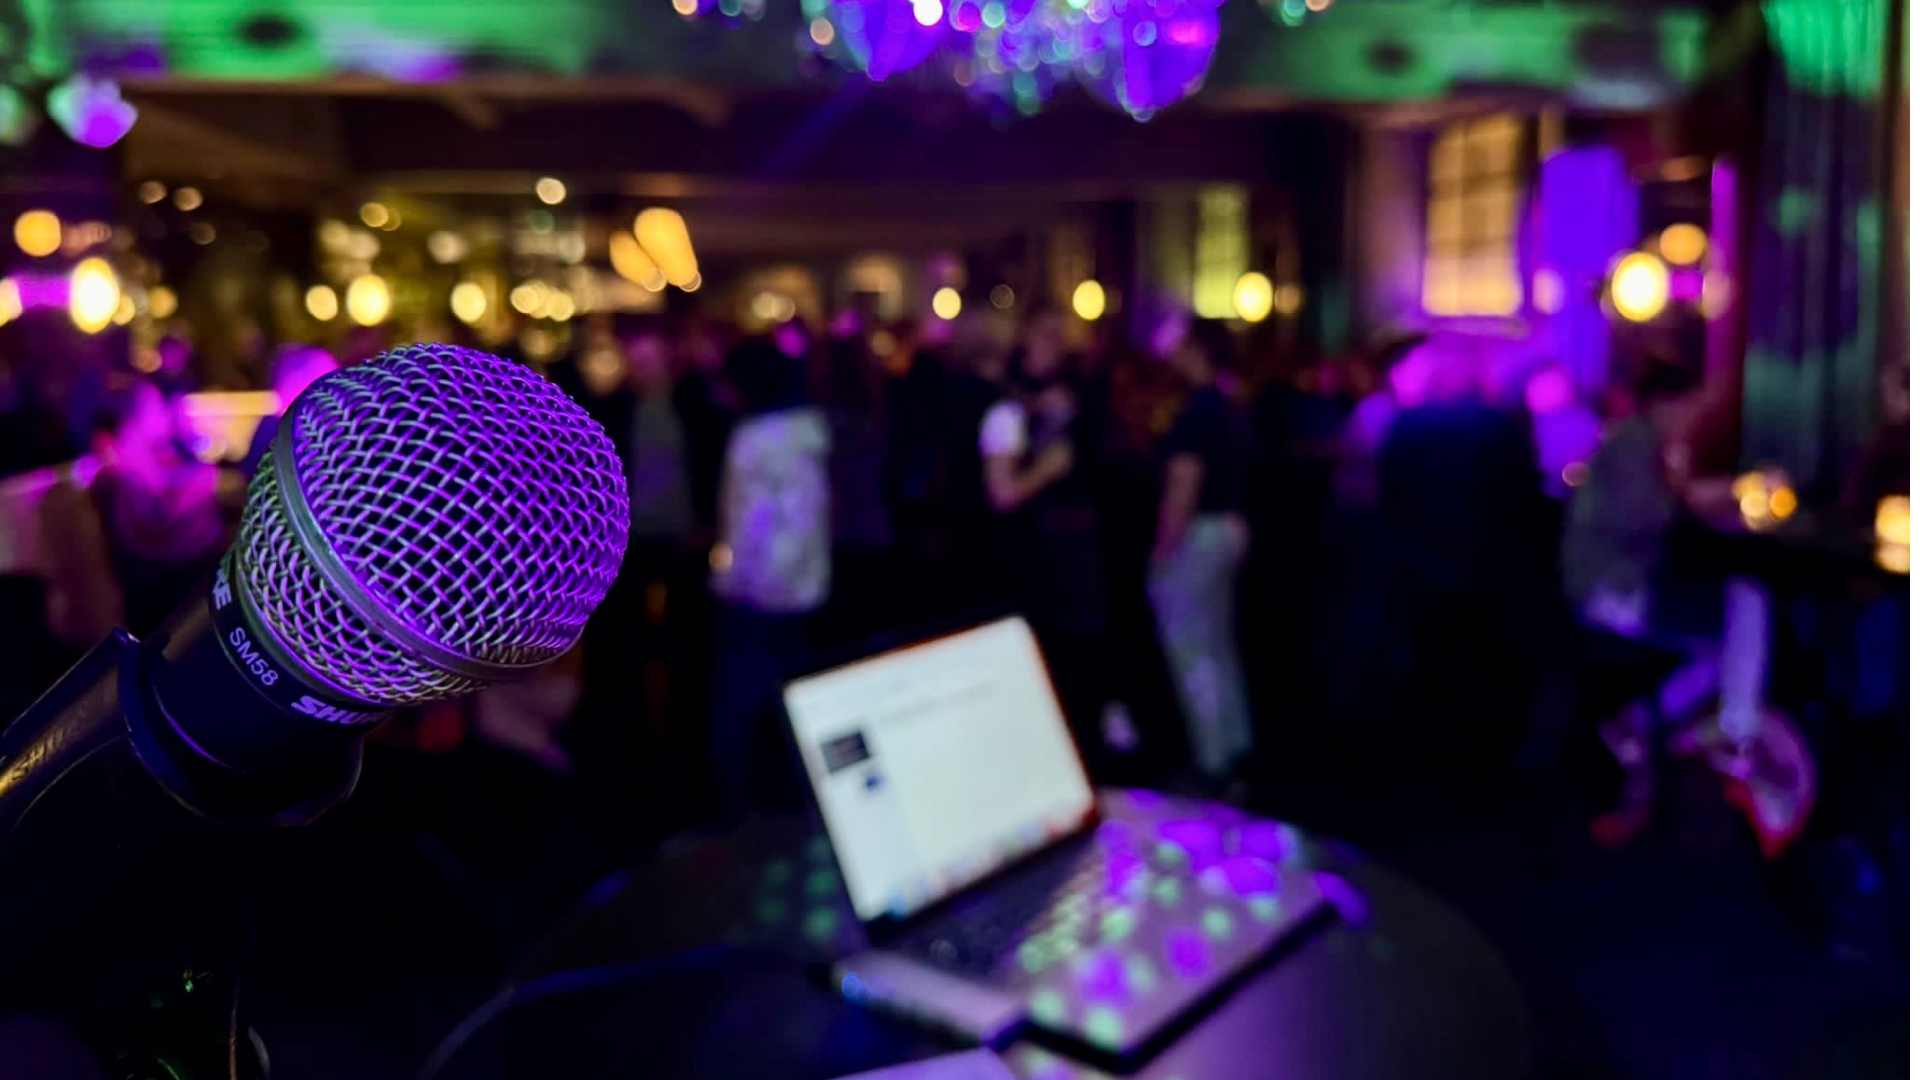 Picture of a microphone in the foreground and blurred out people in the background